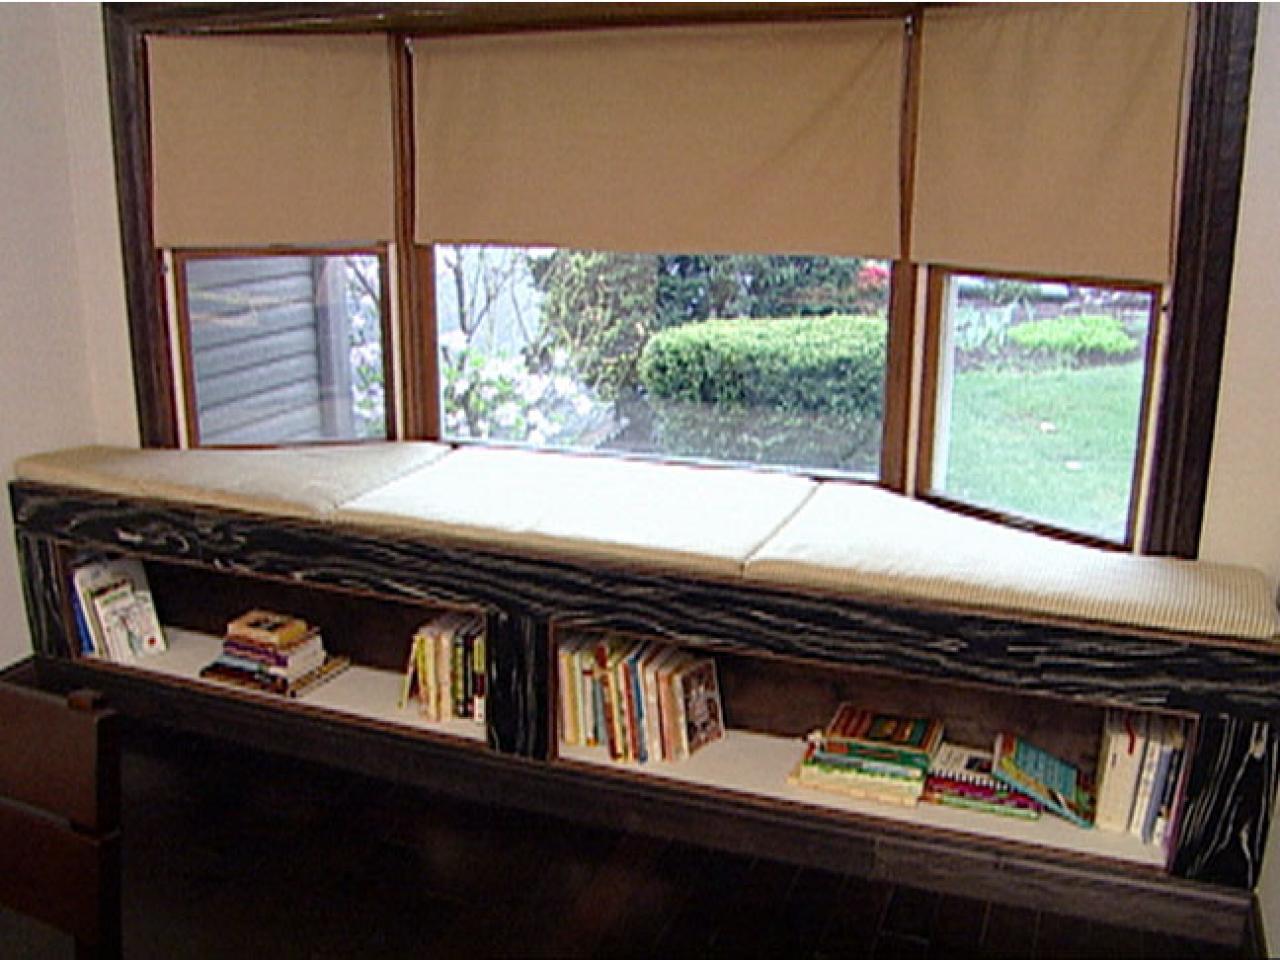 Cushioned Window Bench And Bookshelf, Bookcase Turned Into Bench